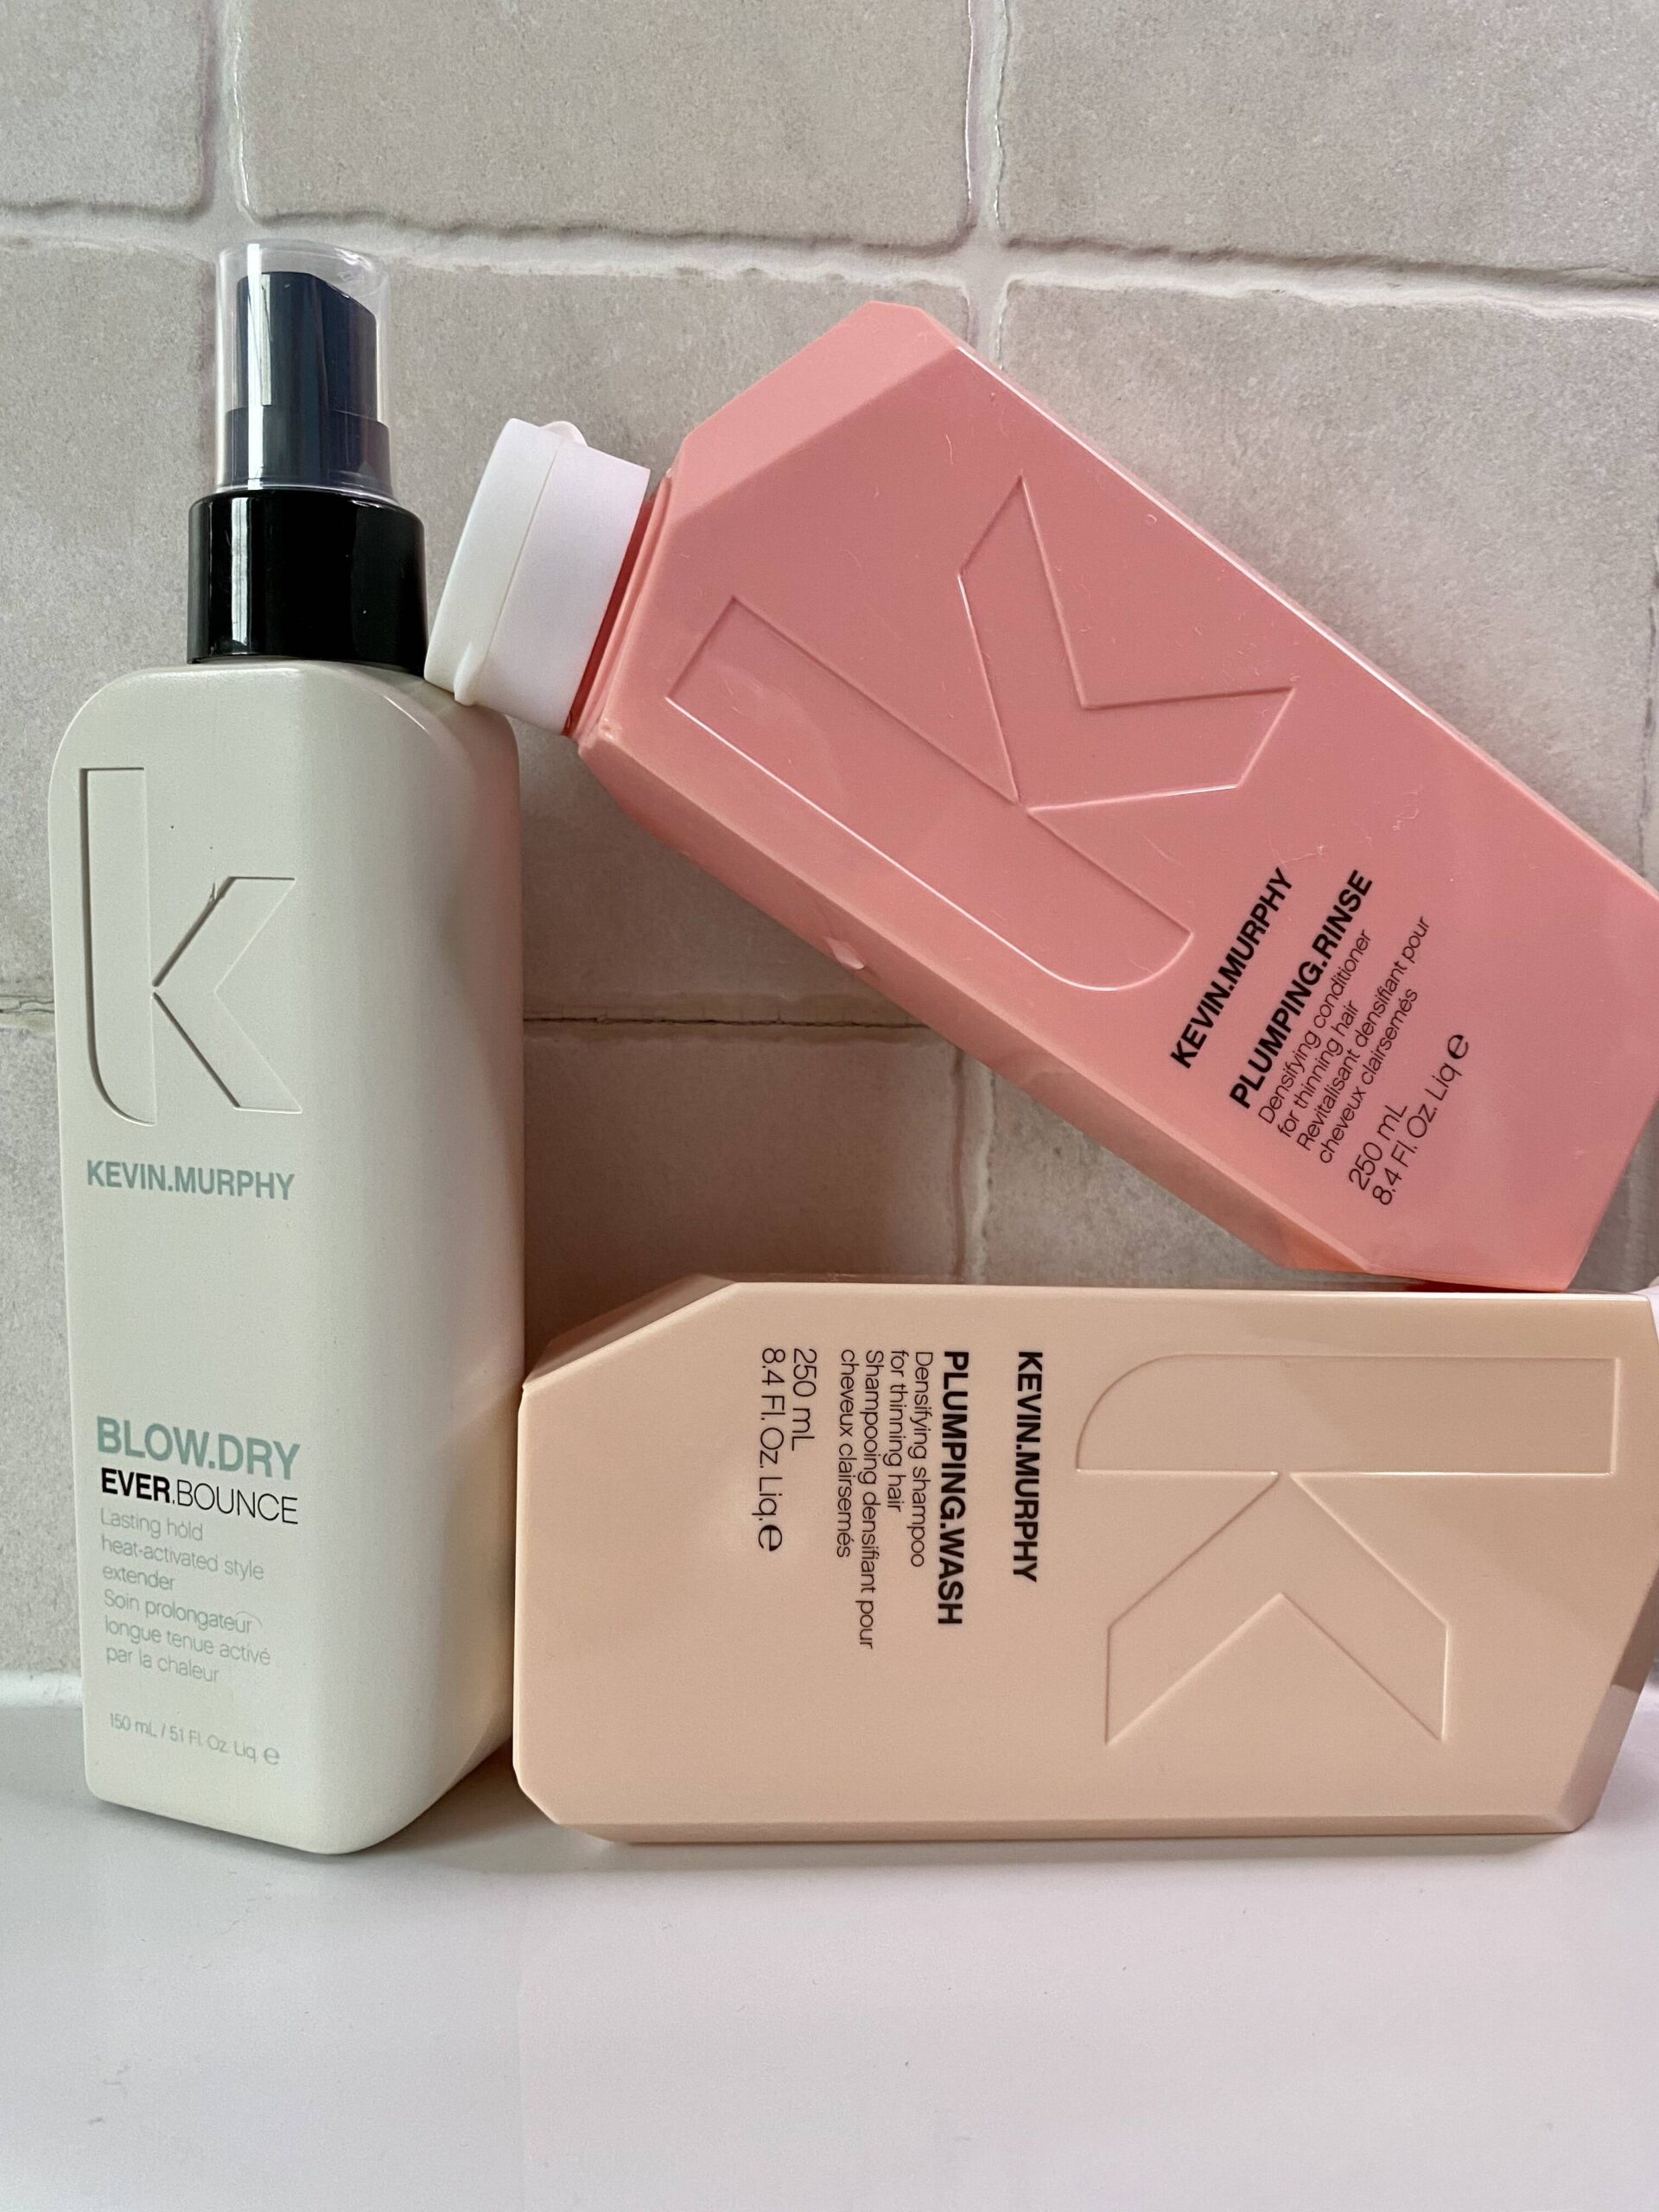 Kevin Murphy blow dry ever bounce, plumping wash and plumping rinse stacked together | Ode2style.com